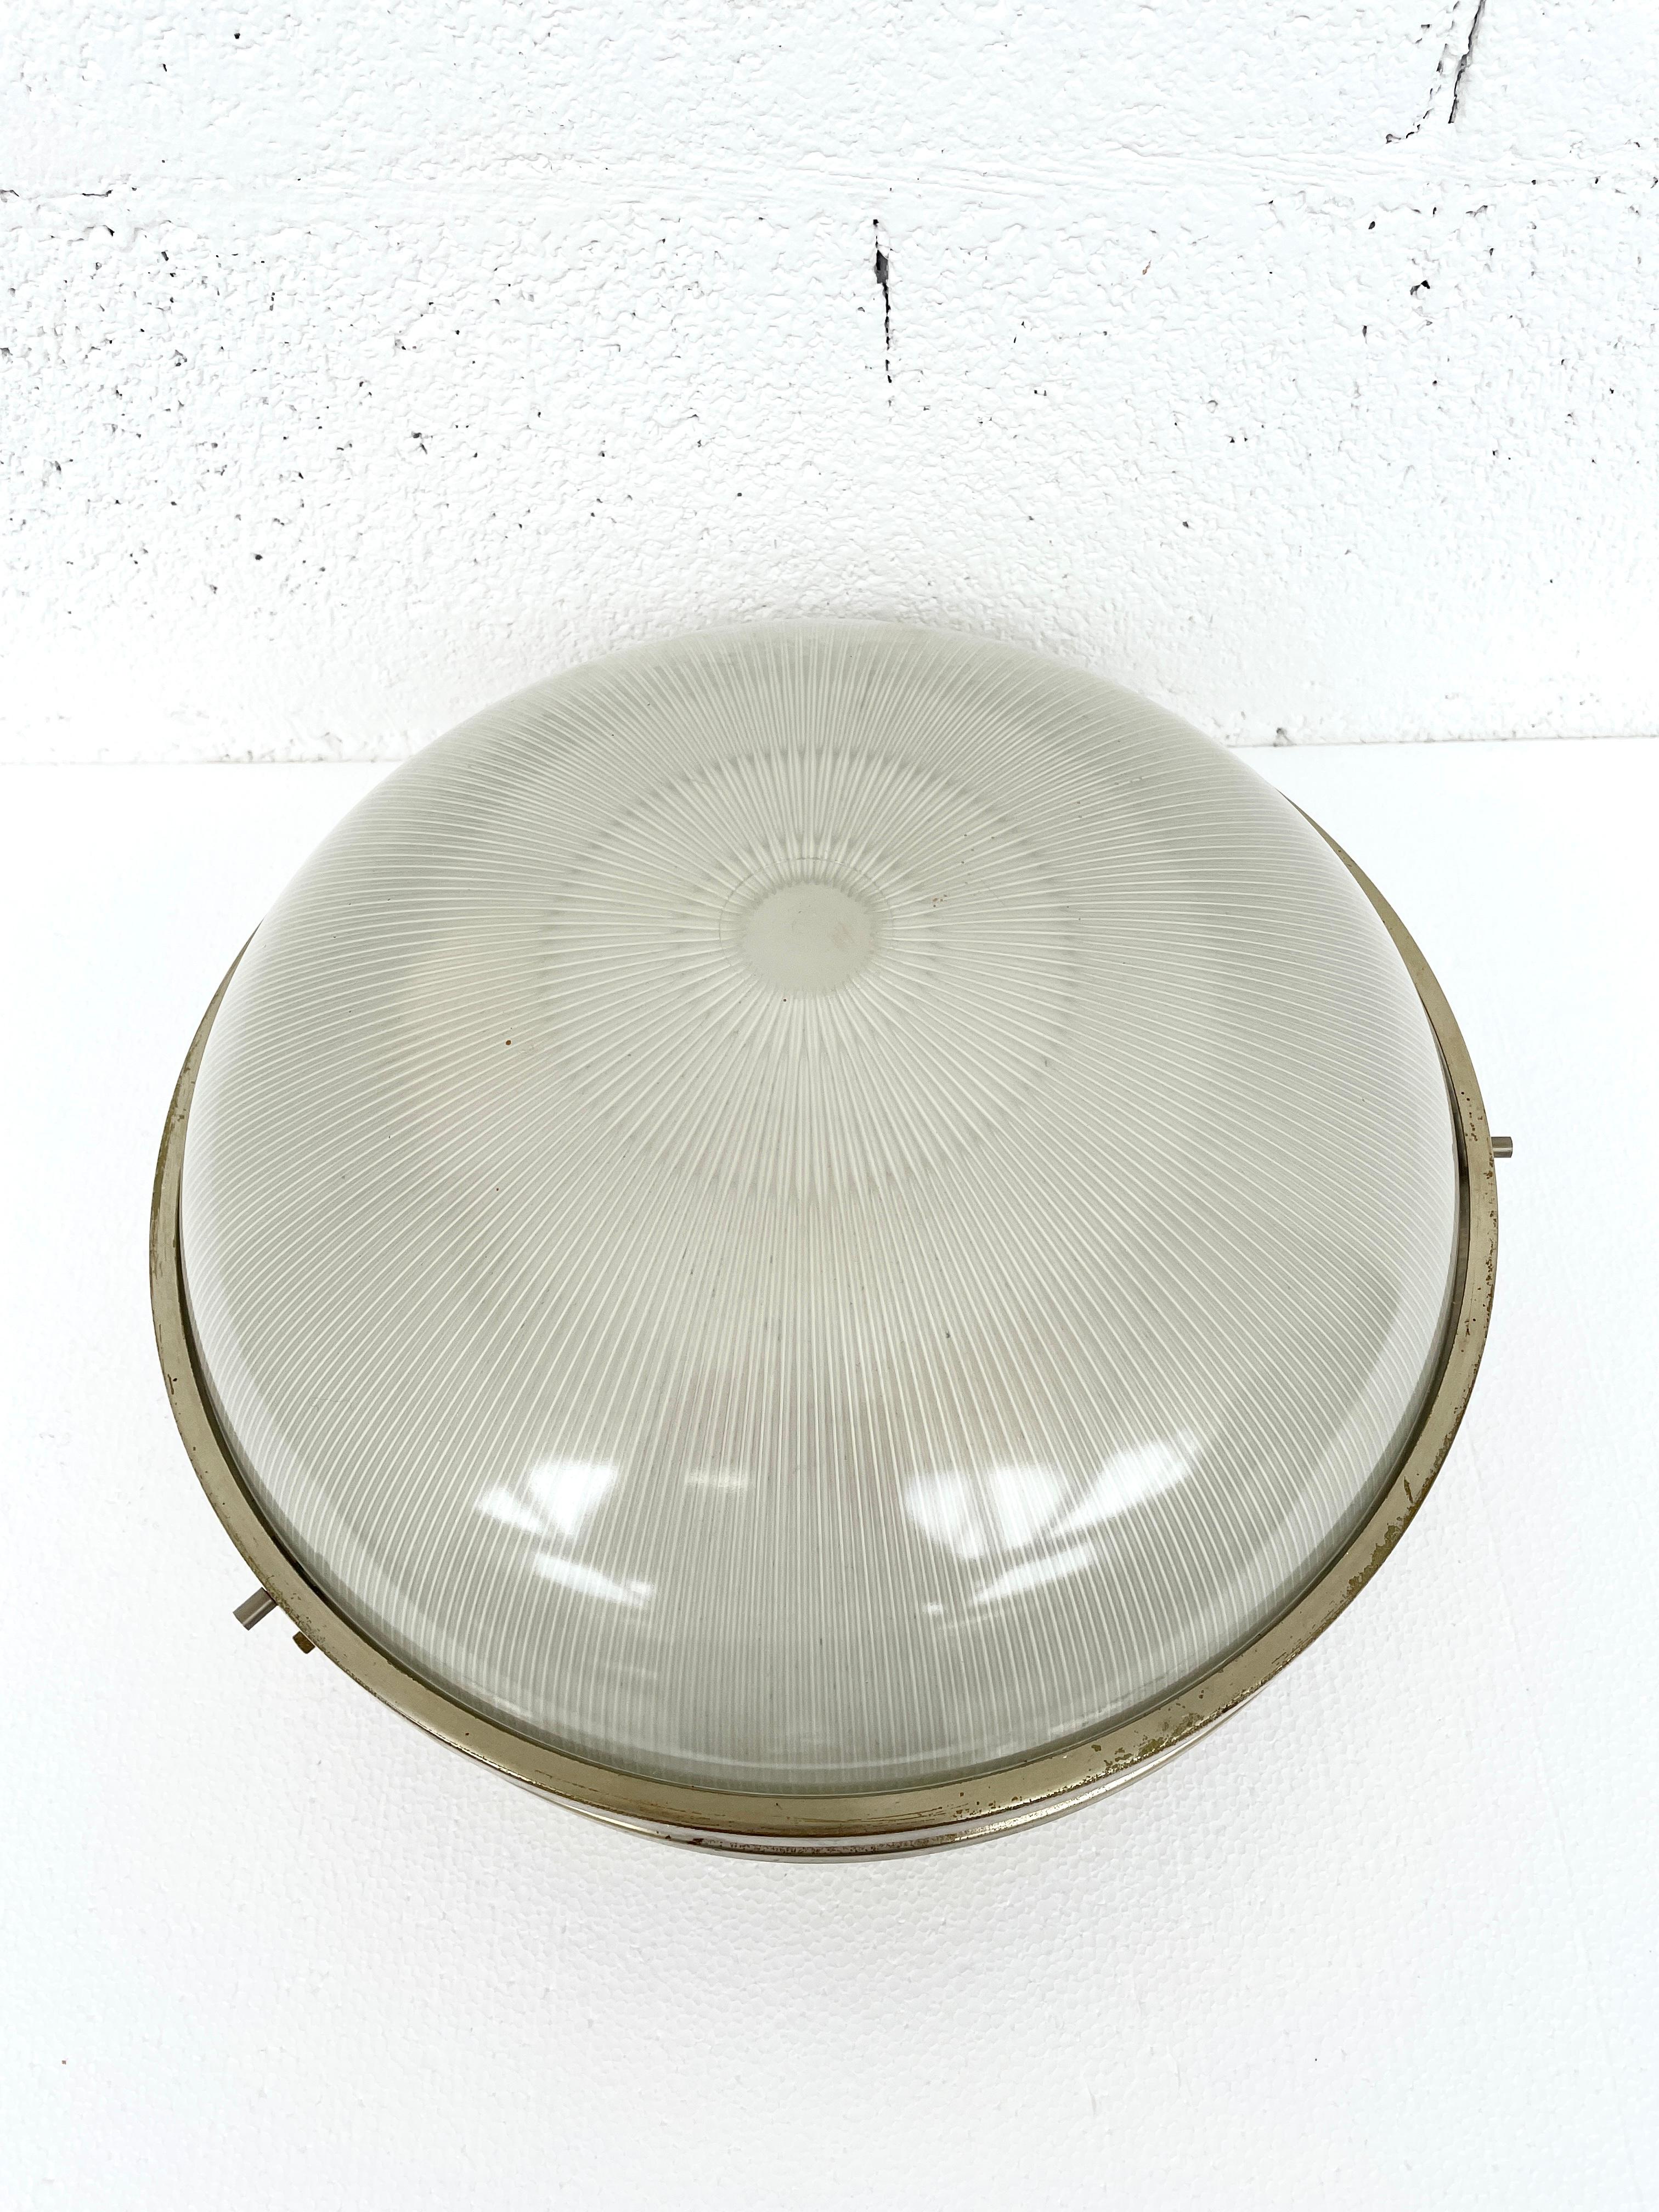 Stunning ceiling lamp large Sigma model designed by Sergio Mazza for Artemide, Italy, 1960s. 
Large nickel plated brass and pressed glass, can be used as wall lights as well.
In good condition. Dimensions: diameter 36 cm - height 16 cm.